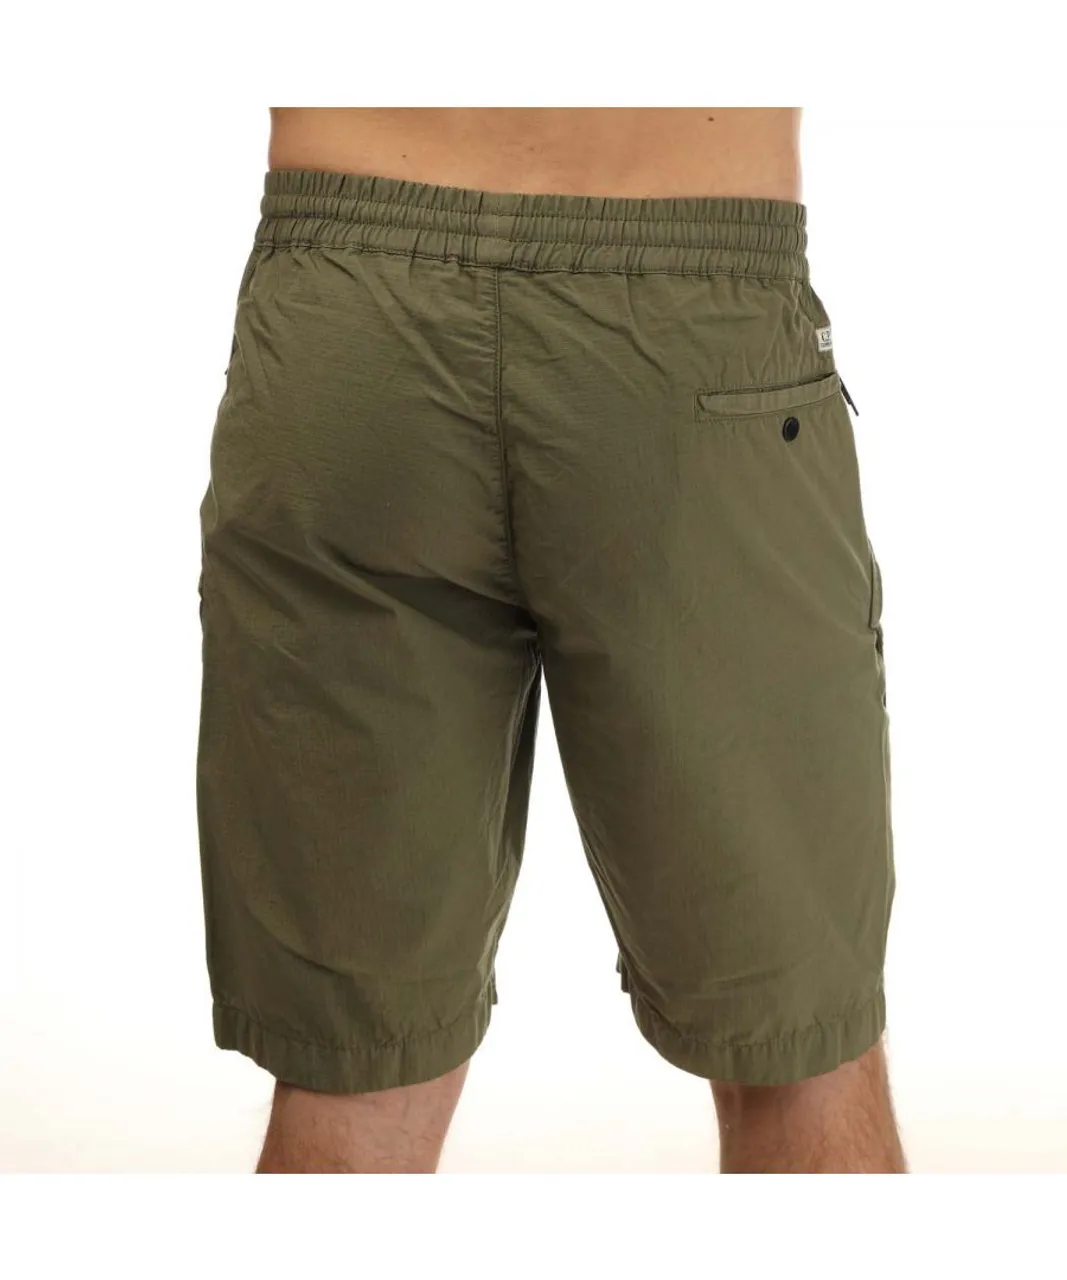 C.P. Company Mens Rip-Stop Shorts in Green Cotton